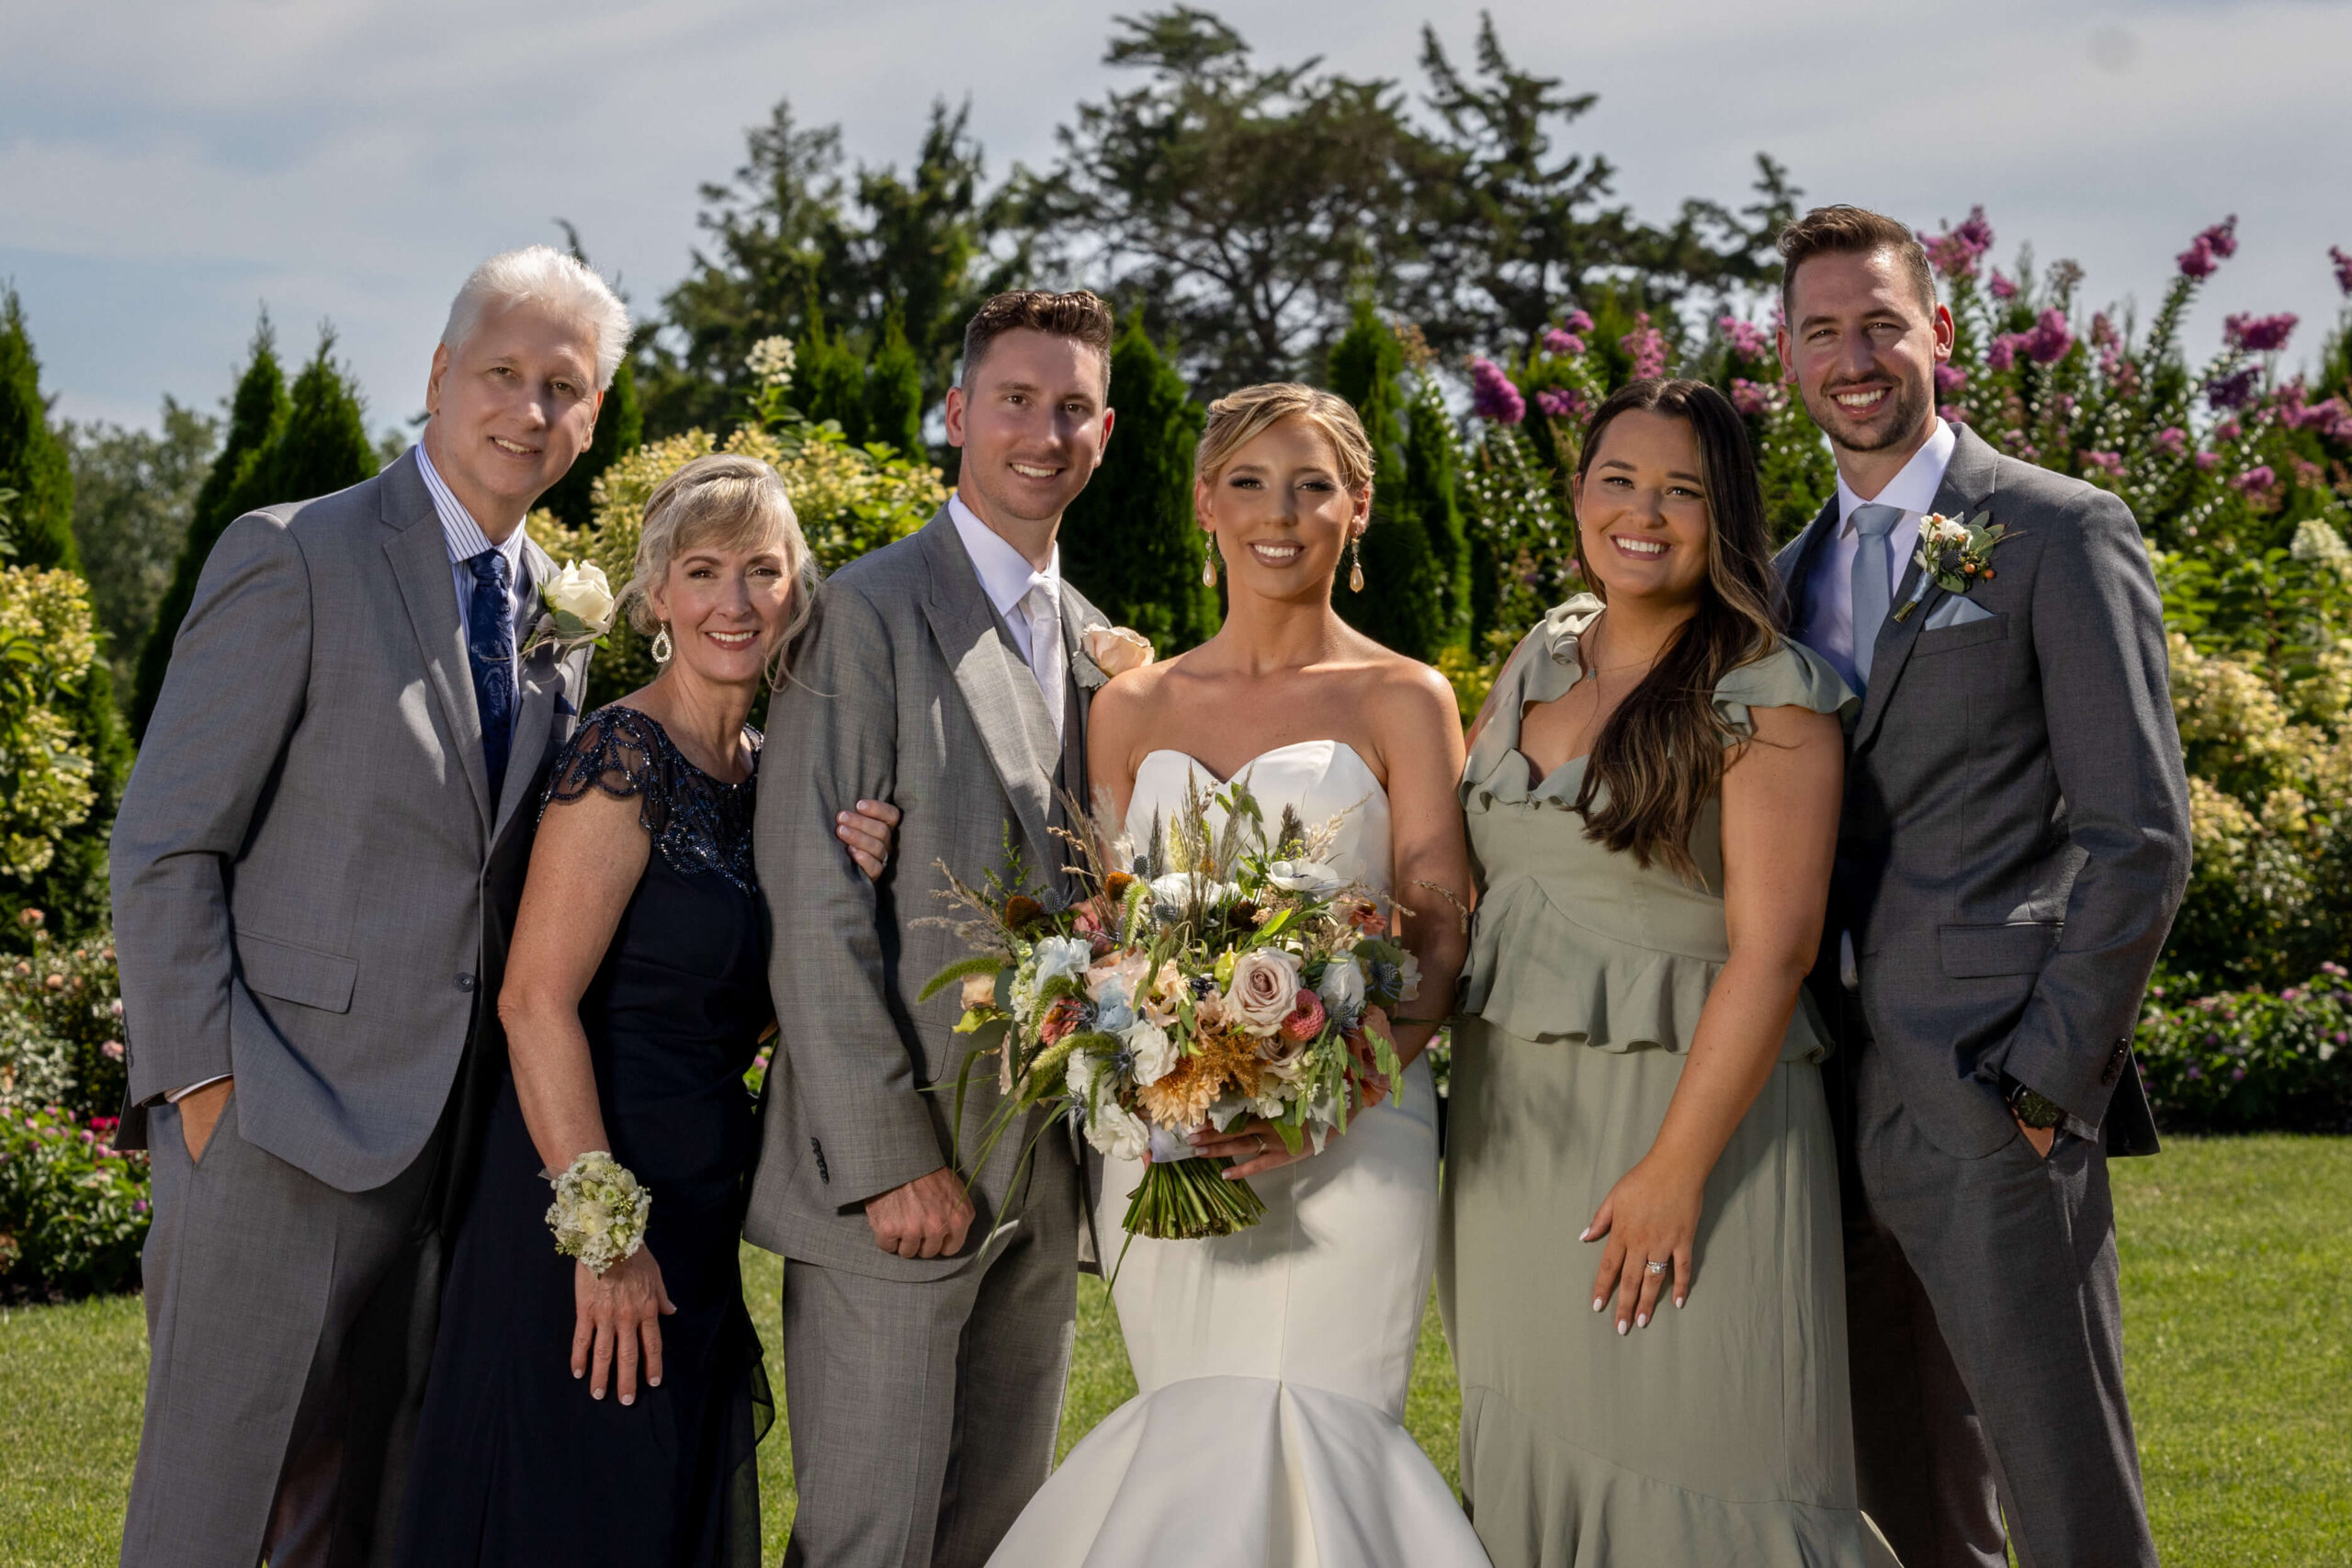 a bride and groom pose with their family at their outdoor wedding in a garden